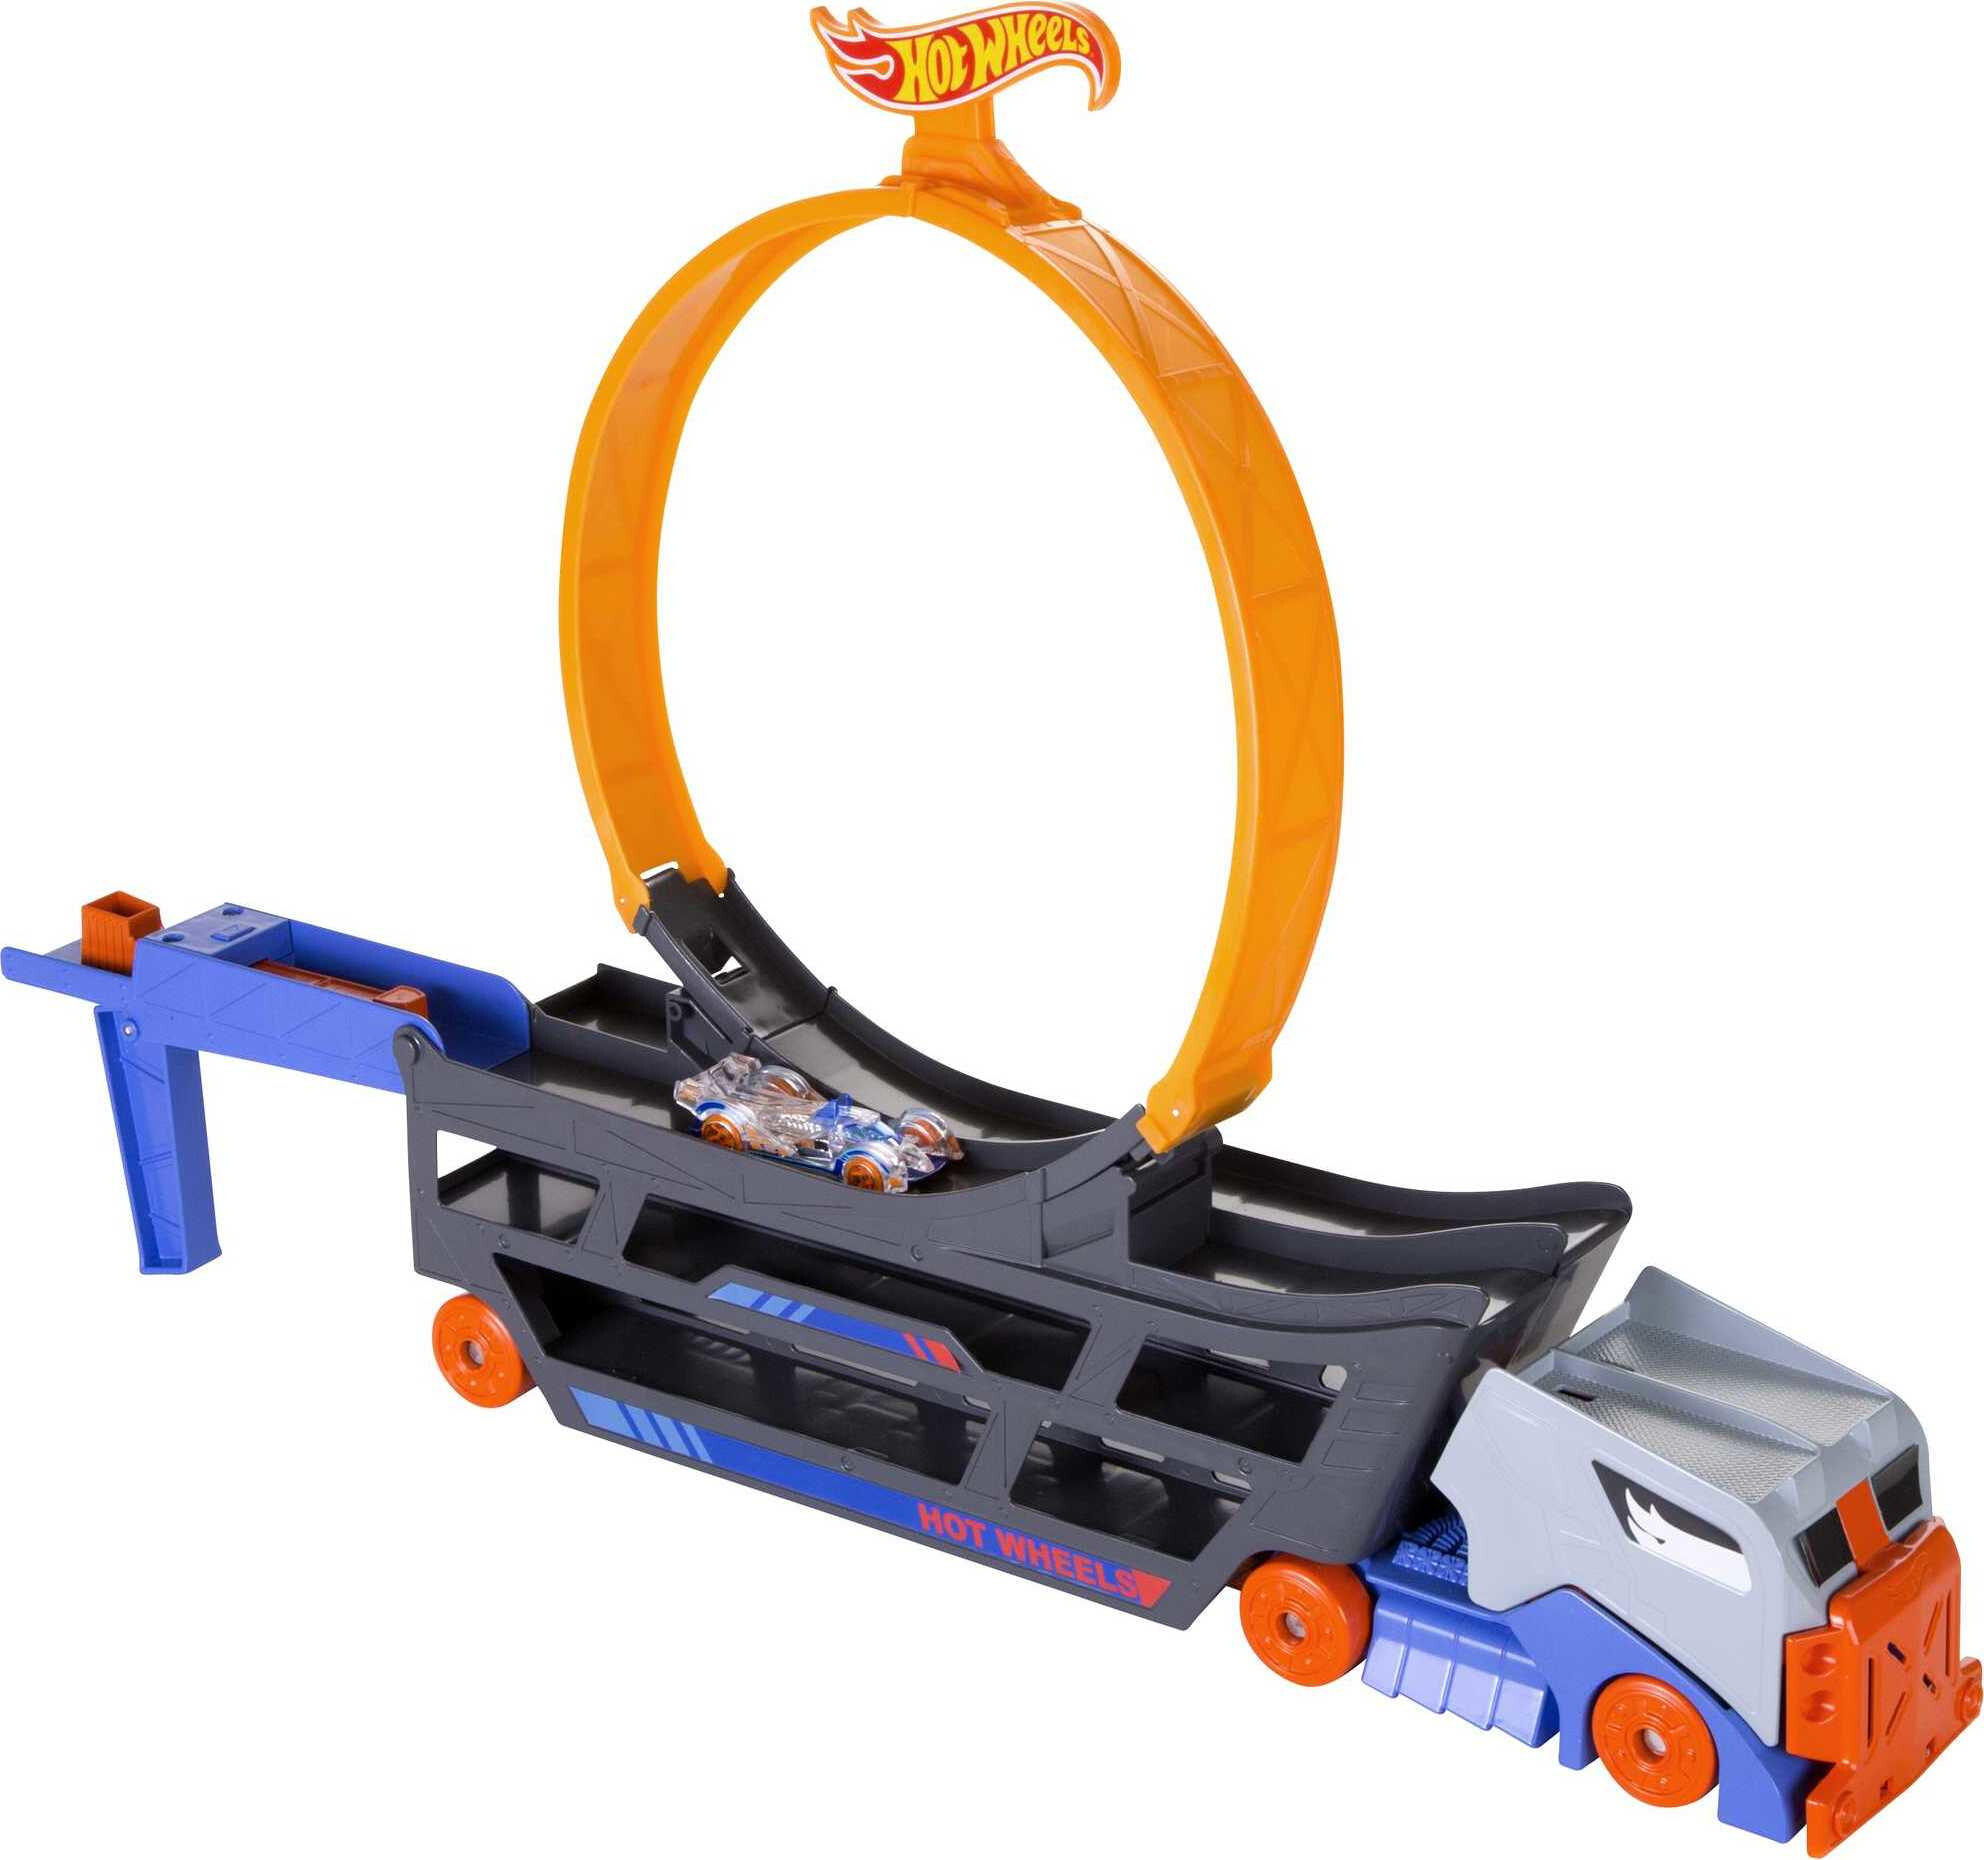 Hot Wheels Stunt and Go Transporter Truck - image 1 of 7